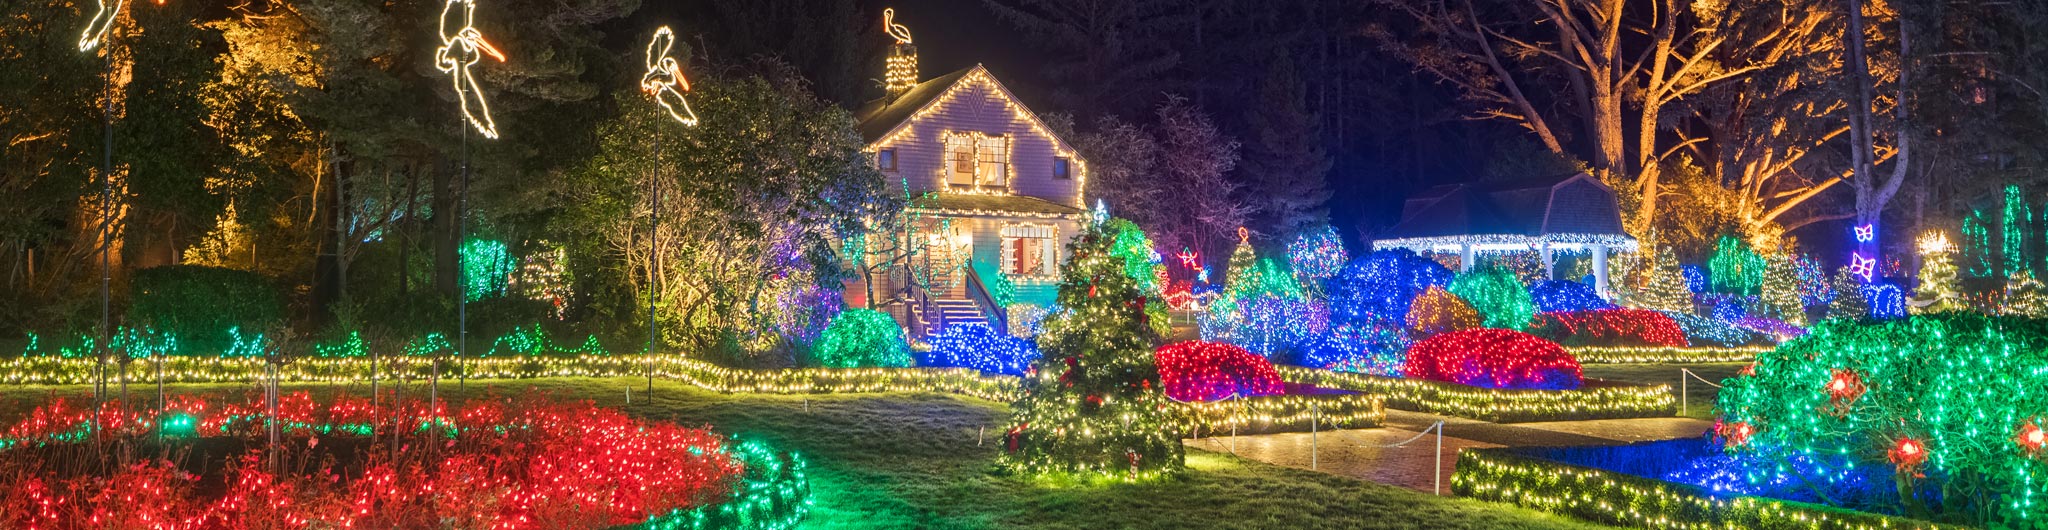 34th Annual Holiday Lights At Shore Acres Oregon S Adventure Coast